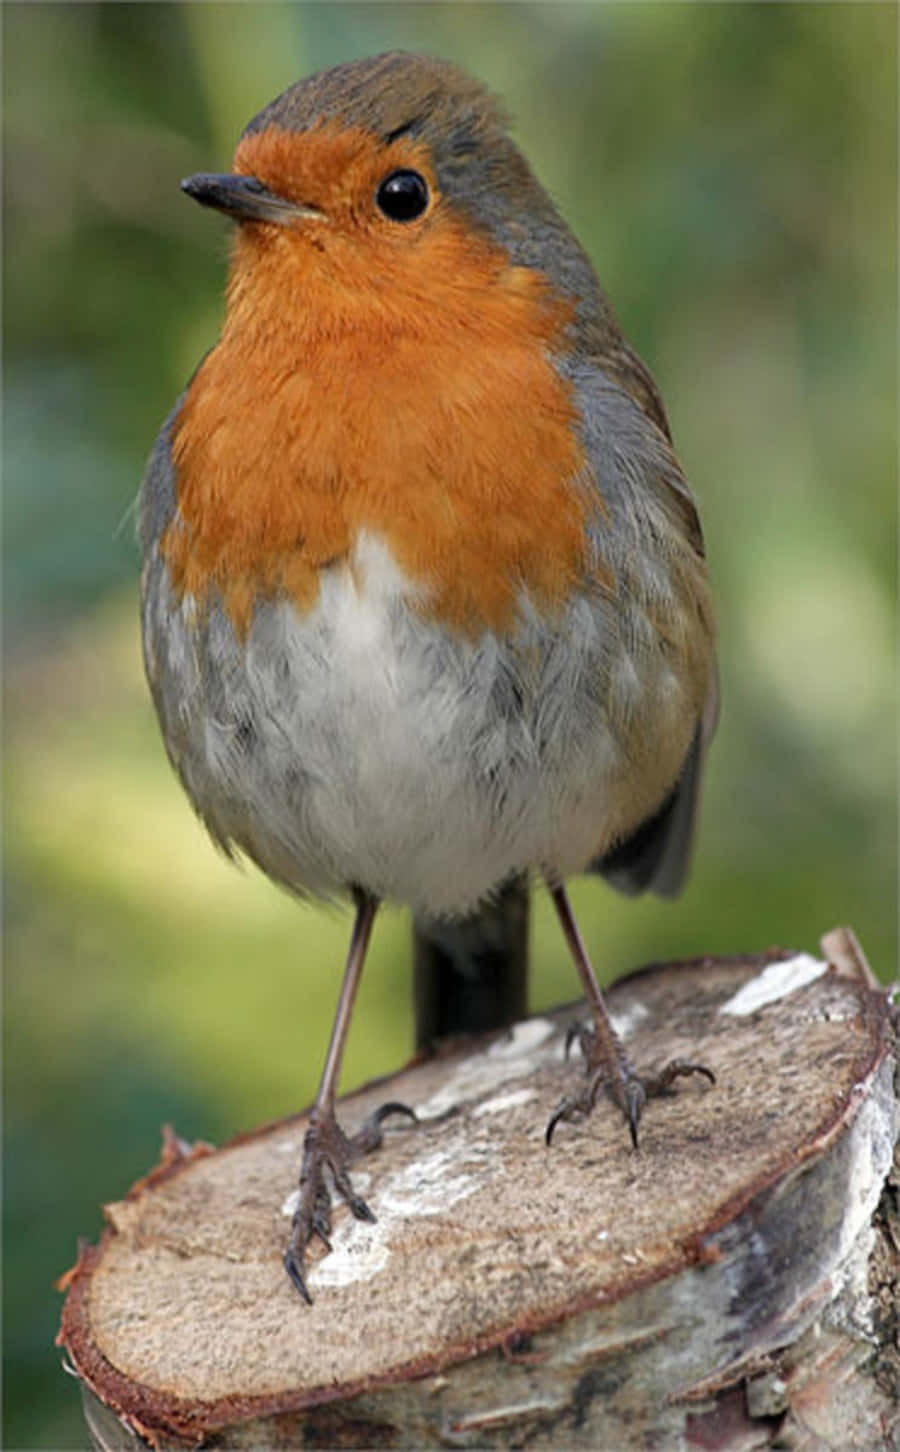 Here's a cheery robin, calling out its merry tune!